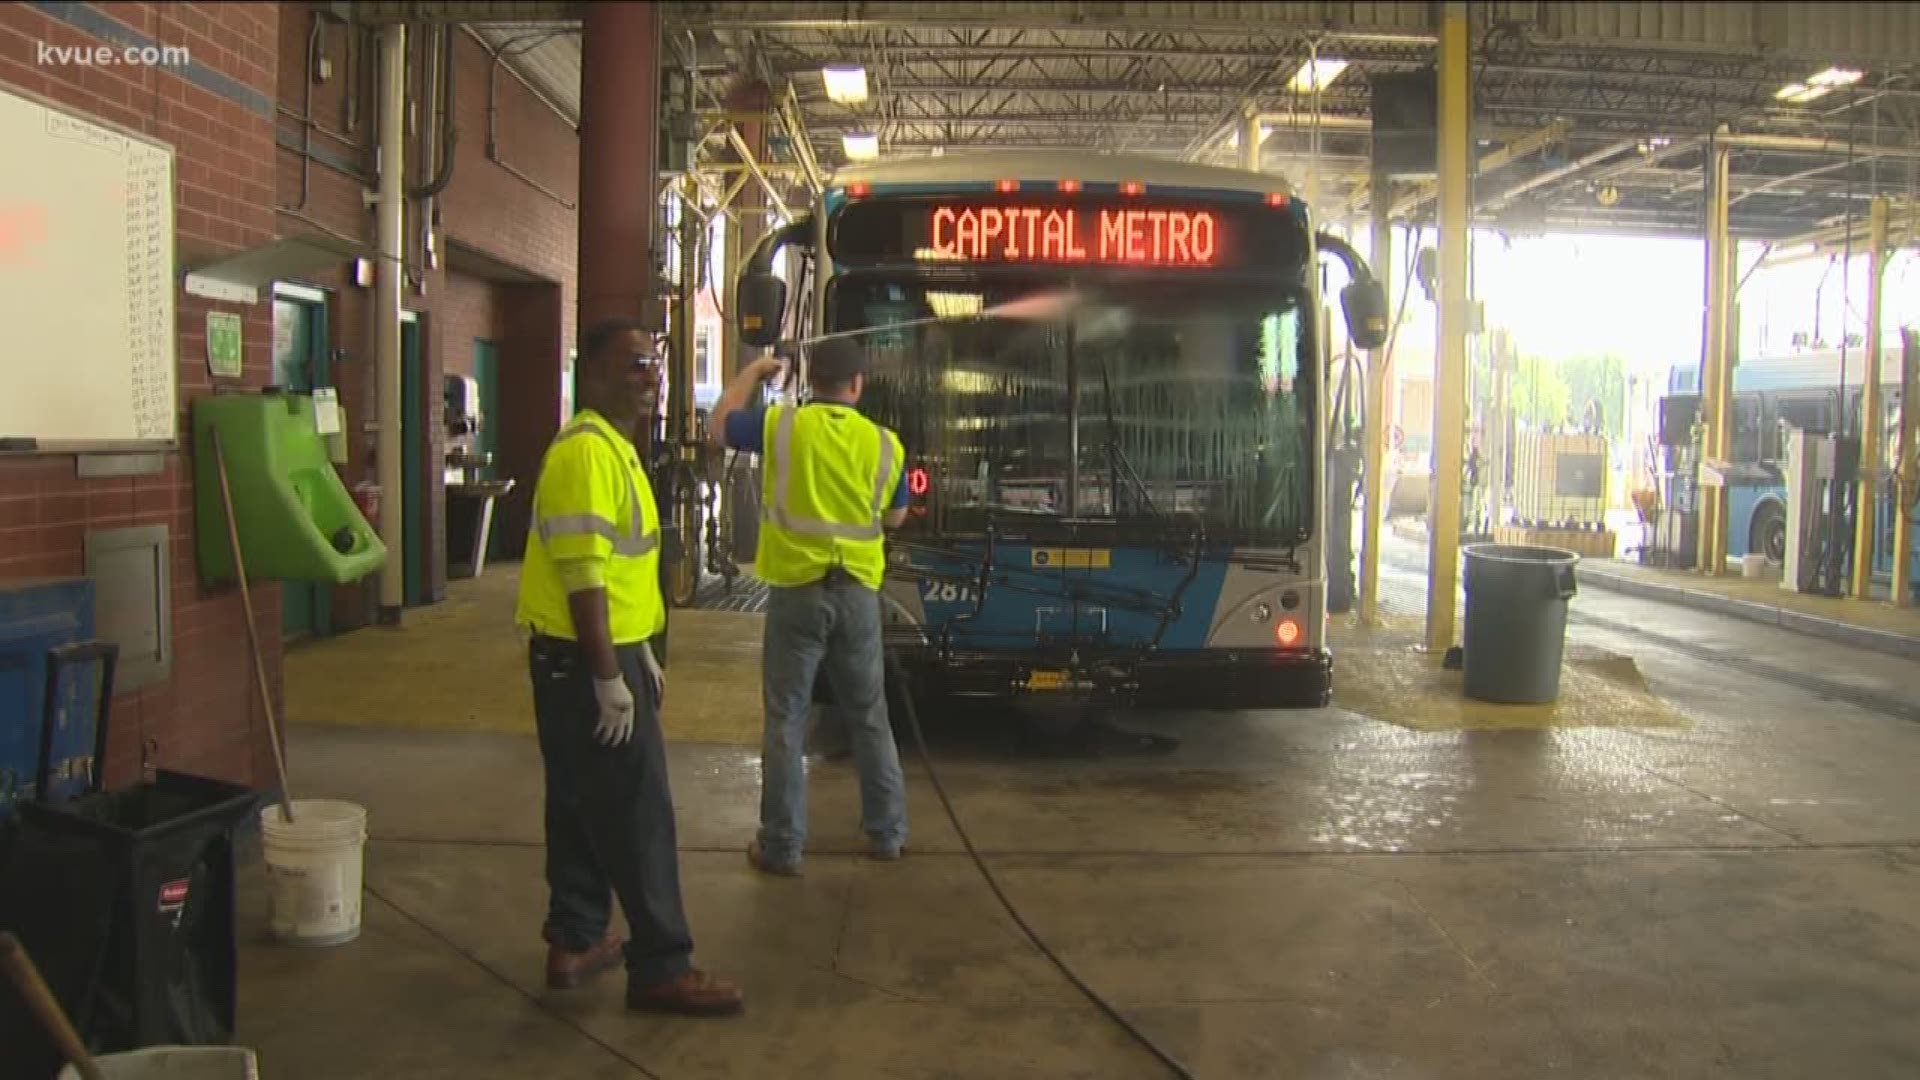 Keeping the Capital Metro bus fleet clean and running smoothly is a big job. The staff services every single bus daily, which includes mopping the floors, washing the windshields, fueling the unit and checking the other engine fluids.